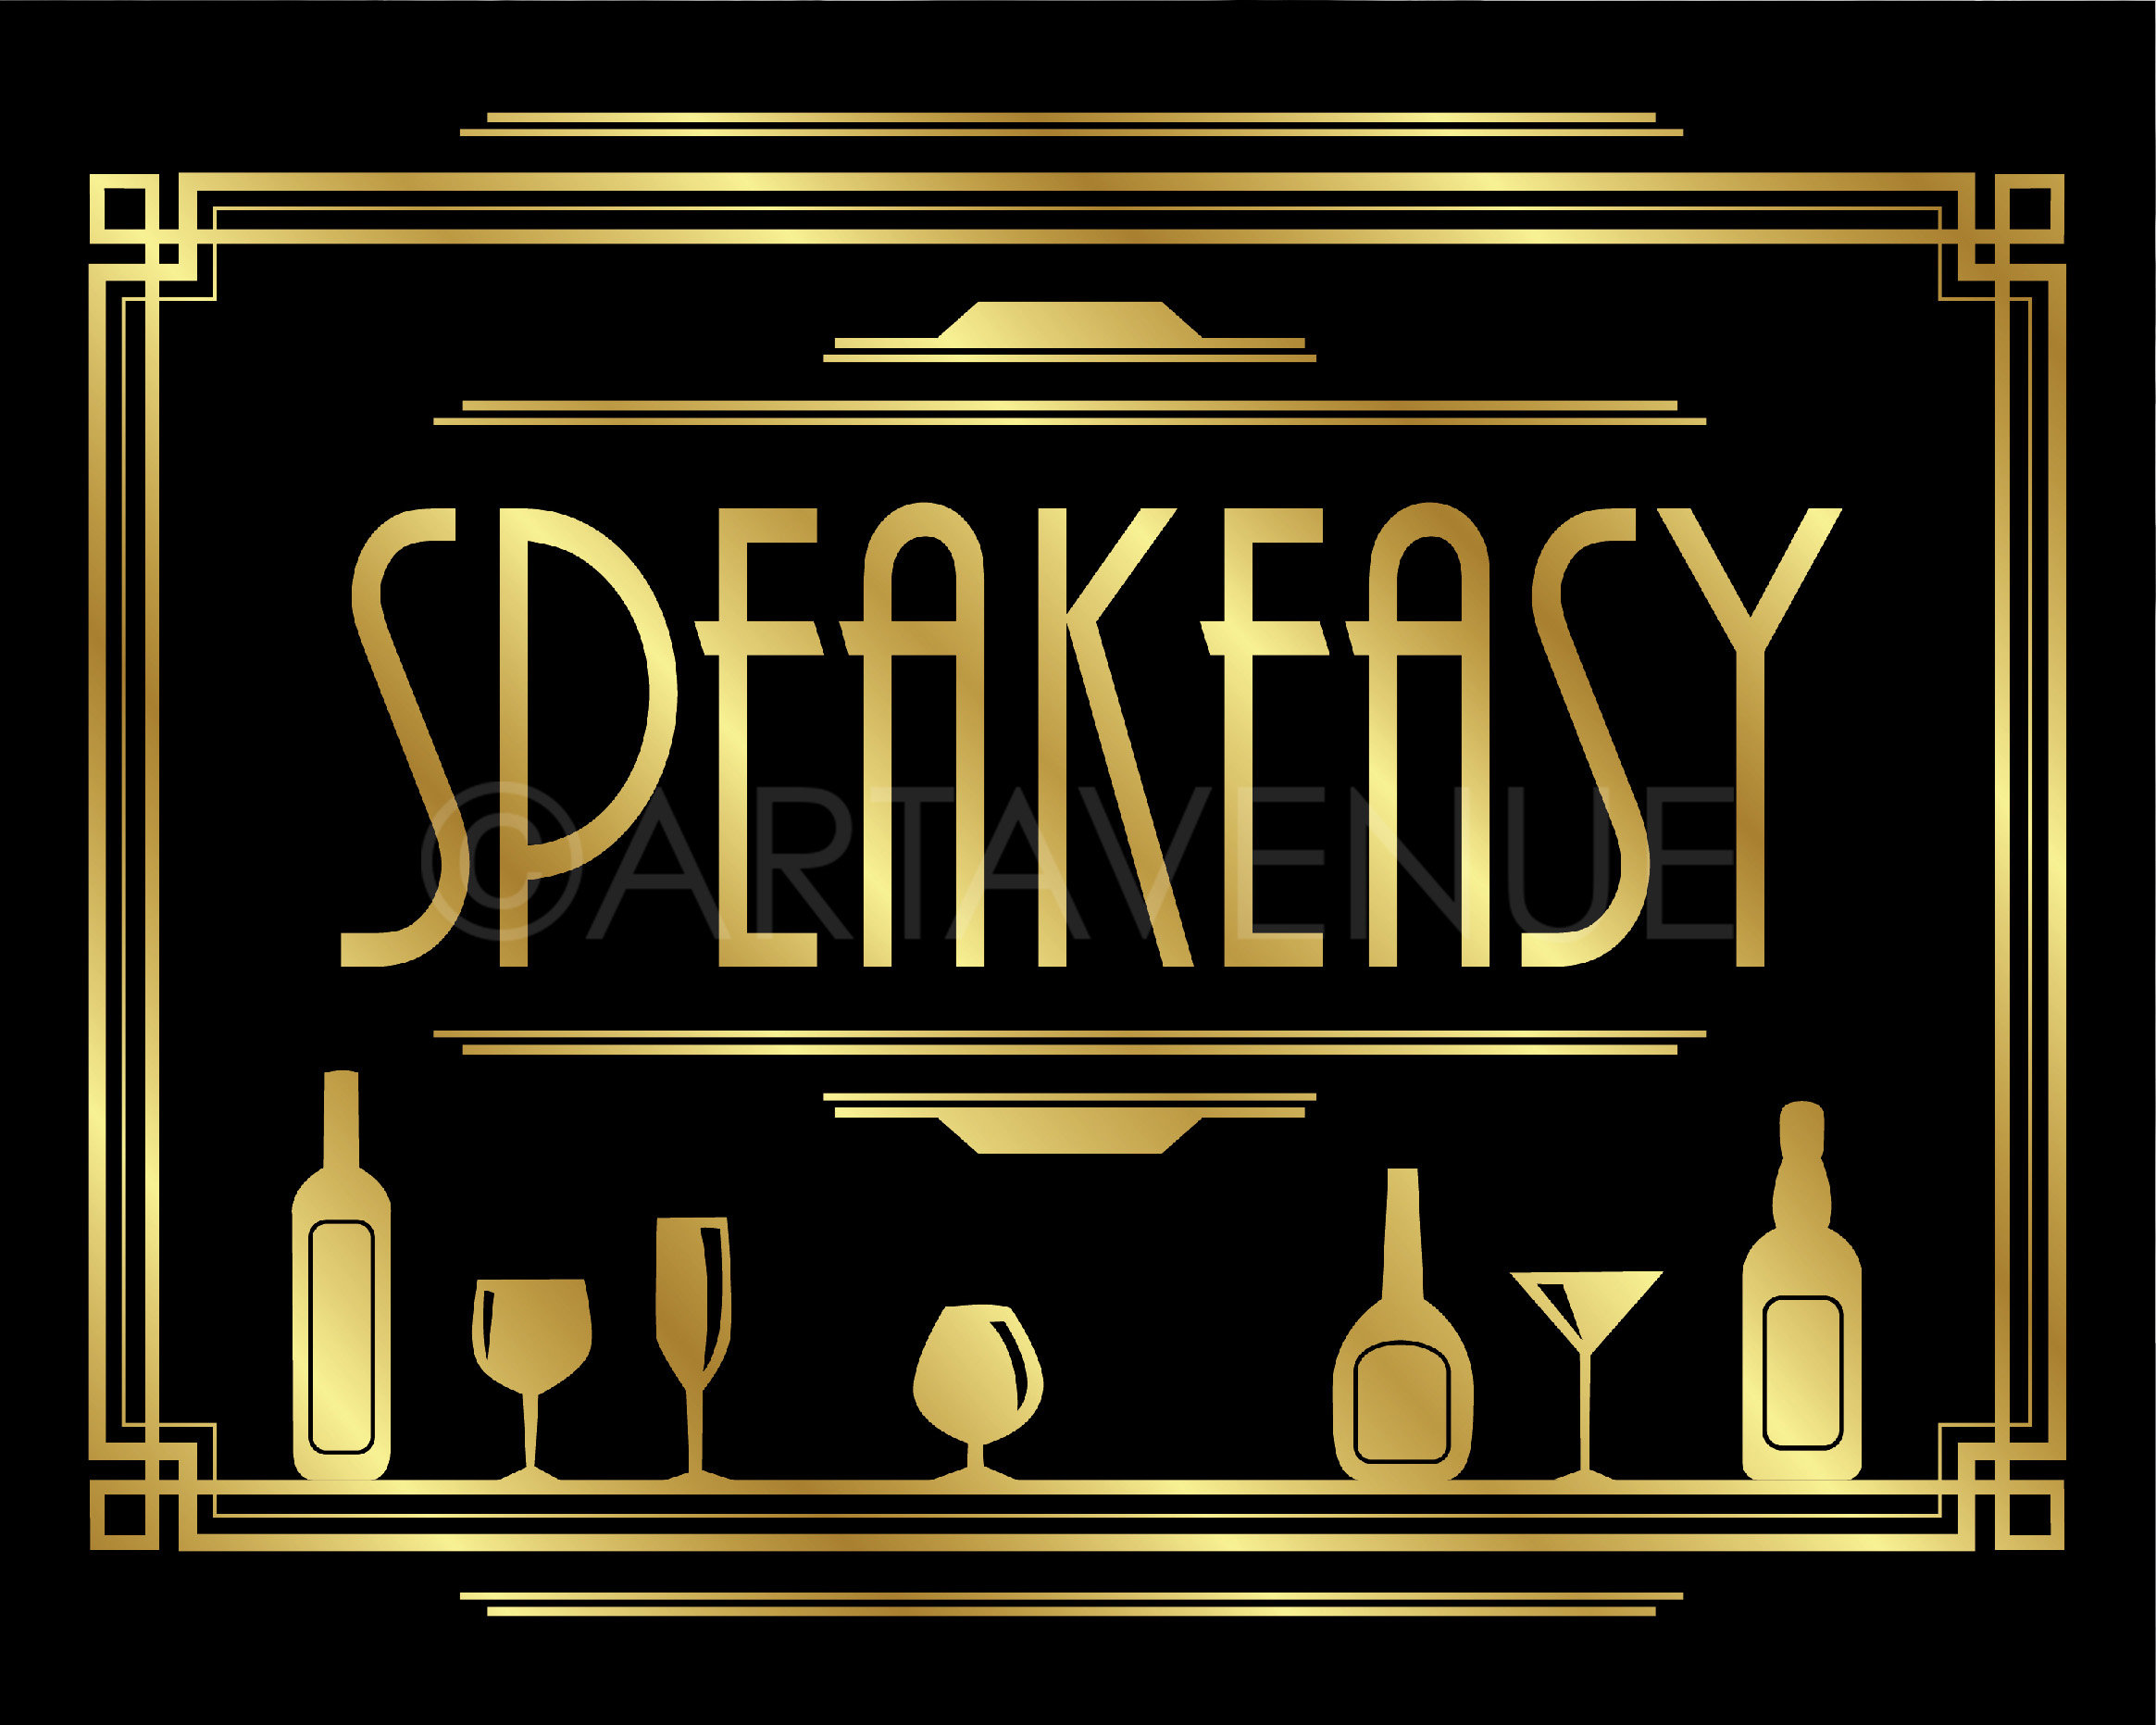 Gatsby Party Decor Printable Sign | Speakeasy House Rules Poster Printable  | Black and Gold Art Deco Wedding Party Decor - ADBG1